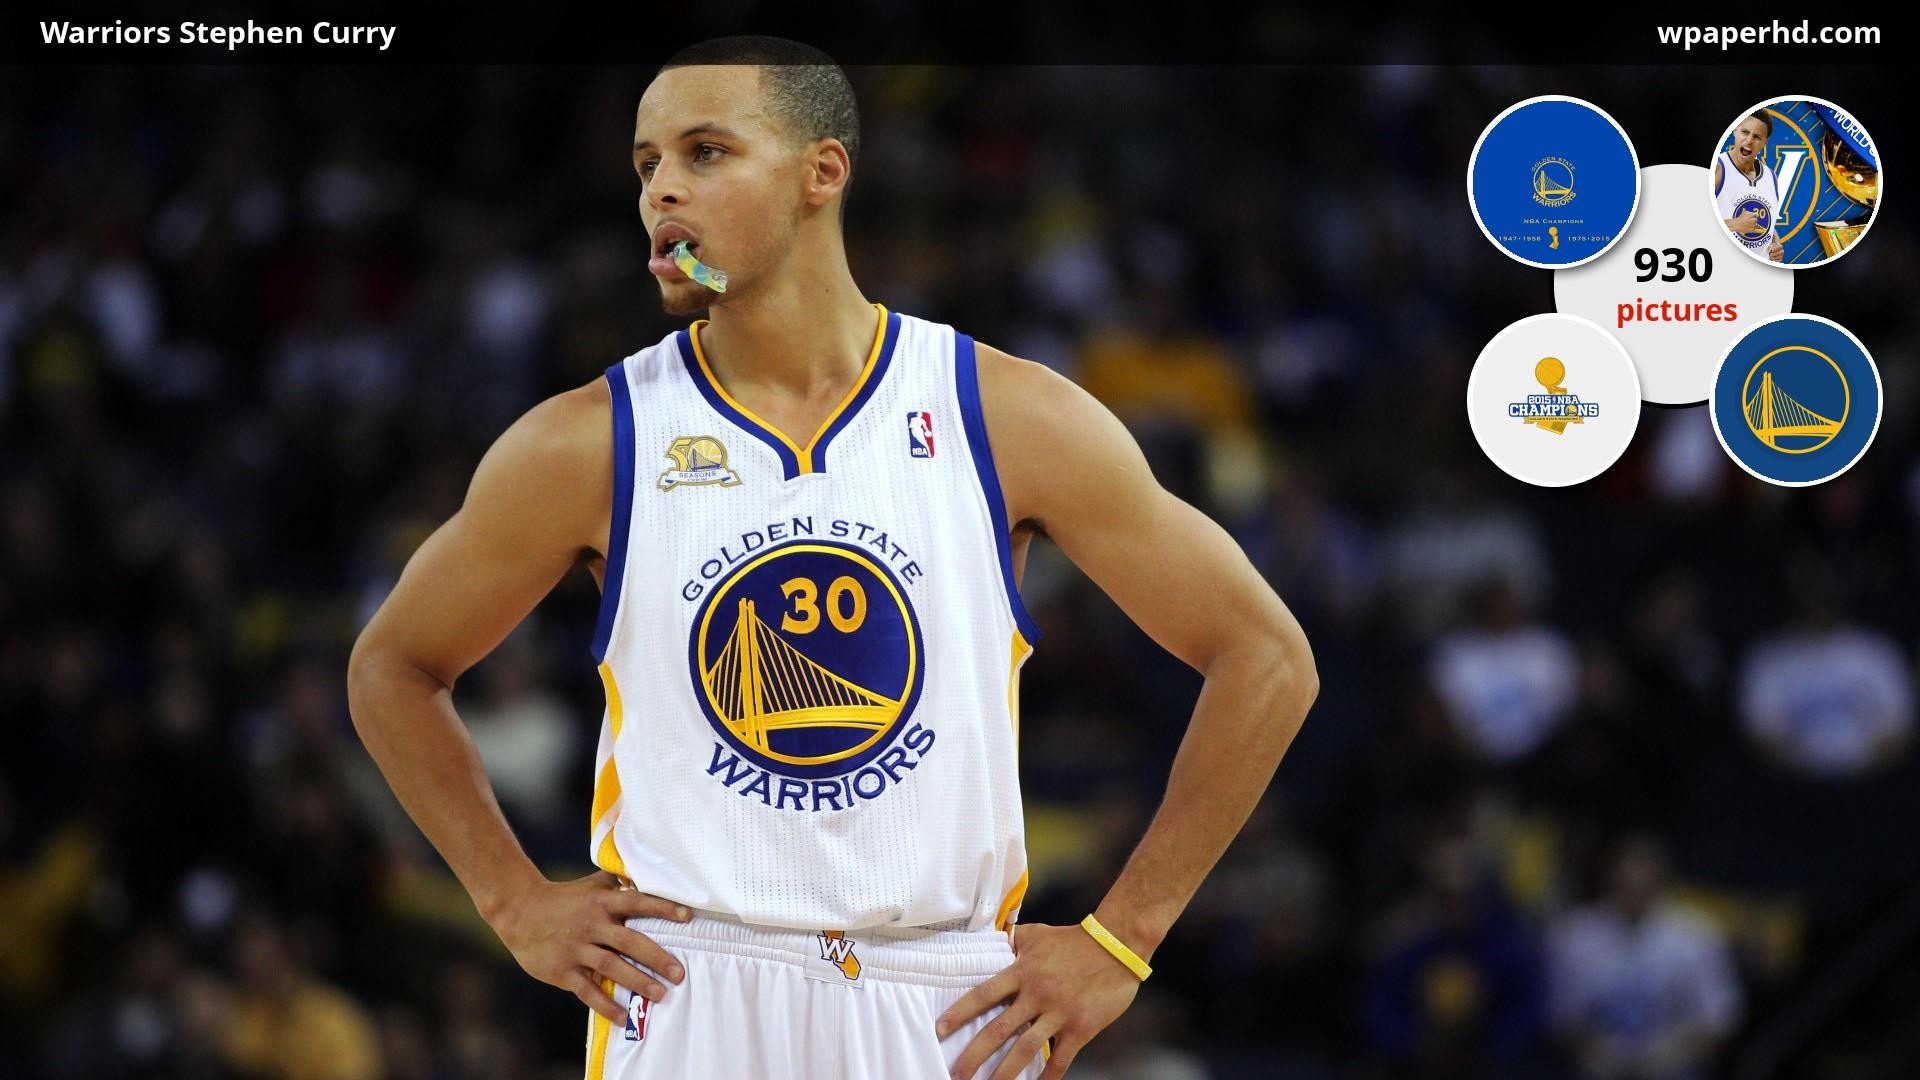 1920x1080 You are on page with Warriors Stephen Curry wallpaper, where you can  download this picture in Original size and ...